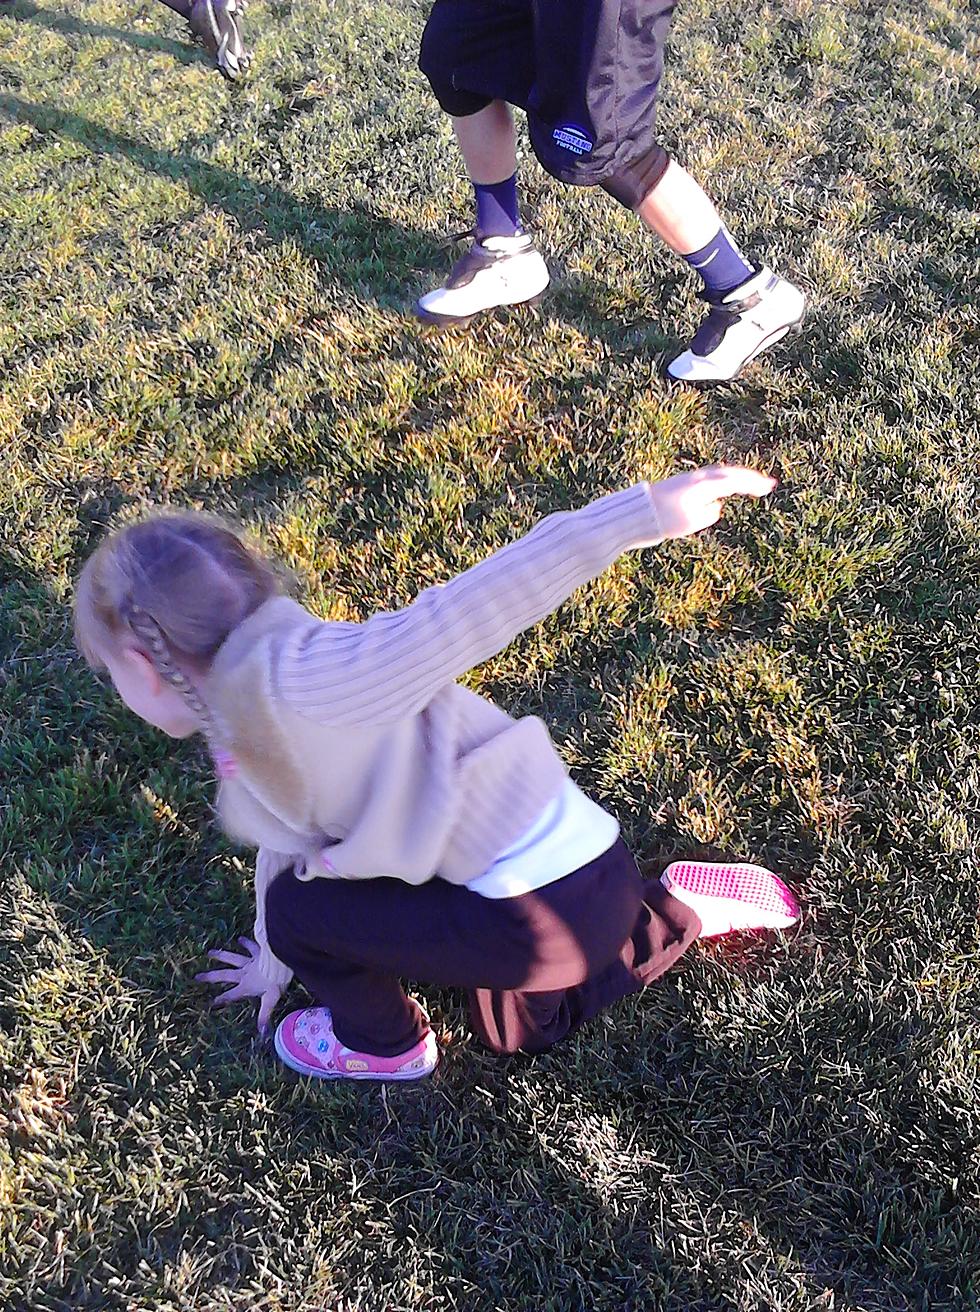 Adorable 4 Year Old Girl Practices With Youth Football Team [SLIDE SHOW]